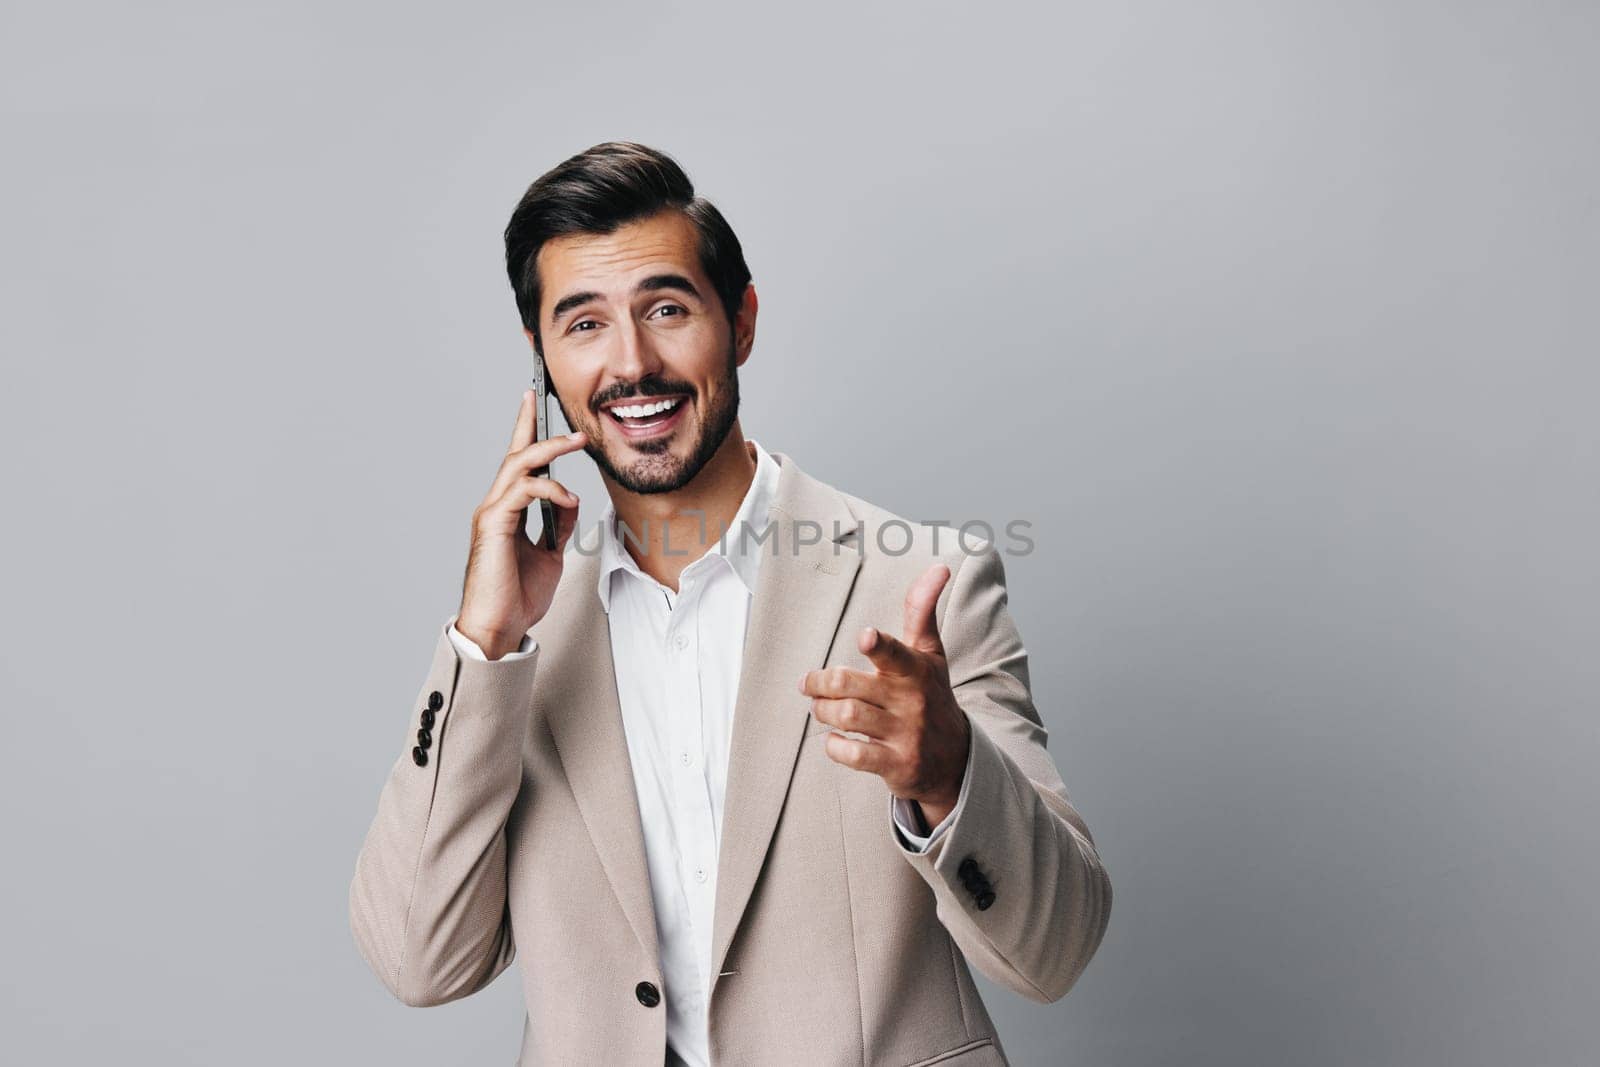 man portrait happy guy business phone hold suit smartphone call smile by SHOTPRIME